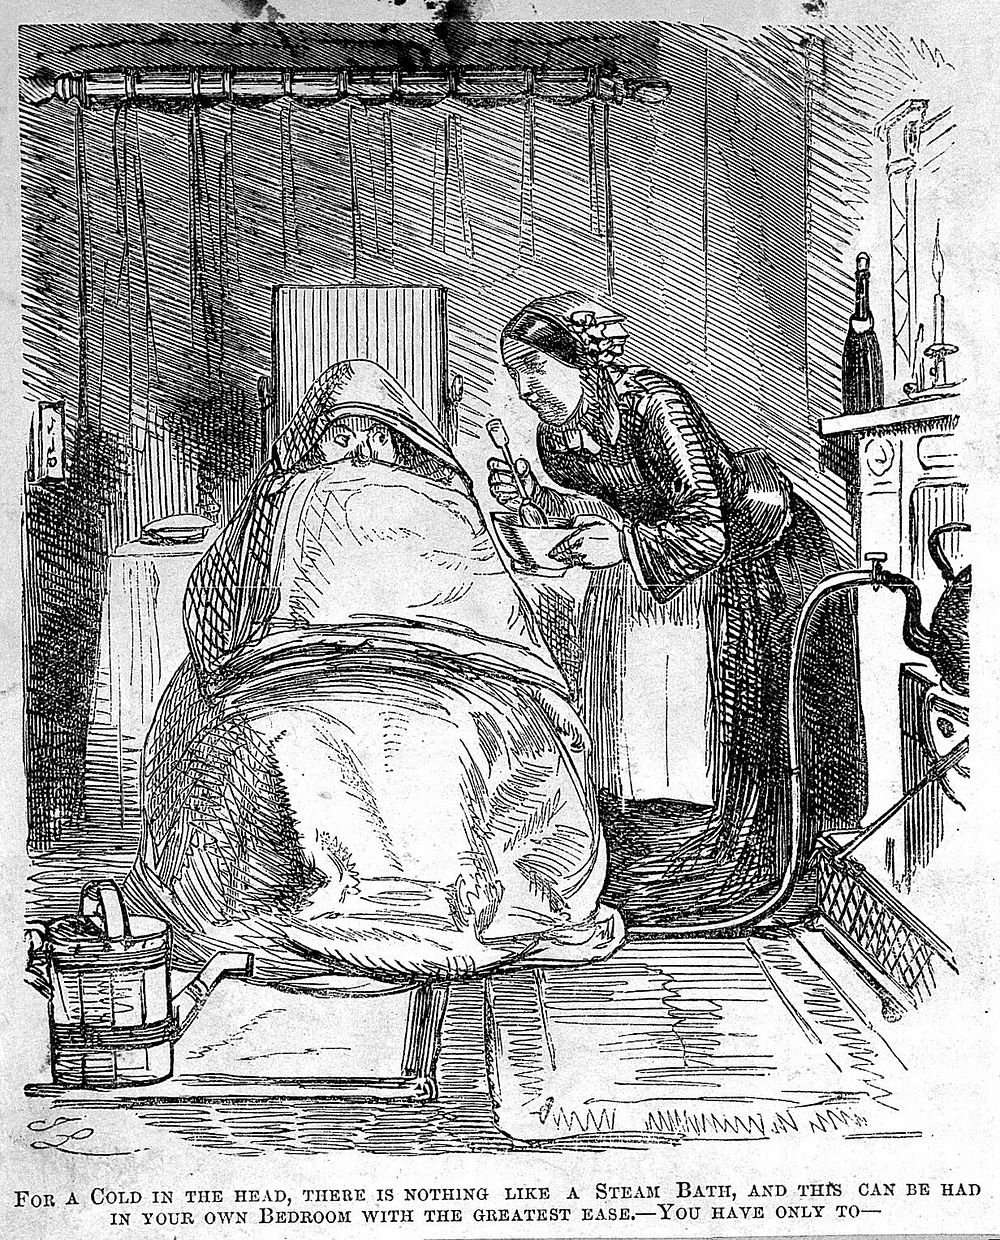 A man ill with a cold, wrapped in blankets as his servant attempts to give him a steam bath. Wood engraving.